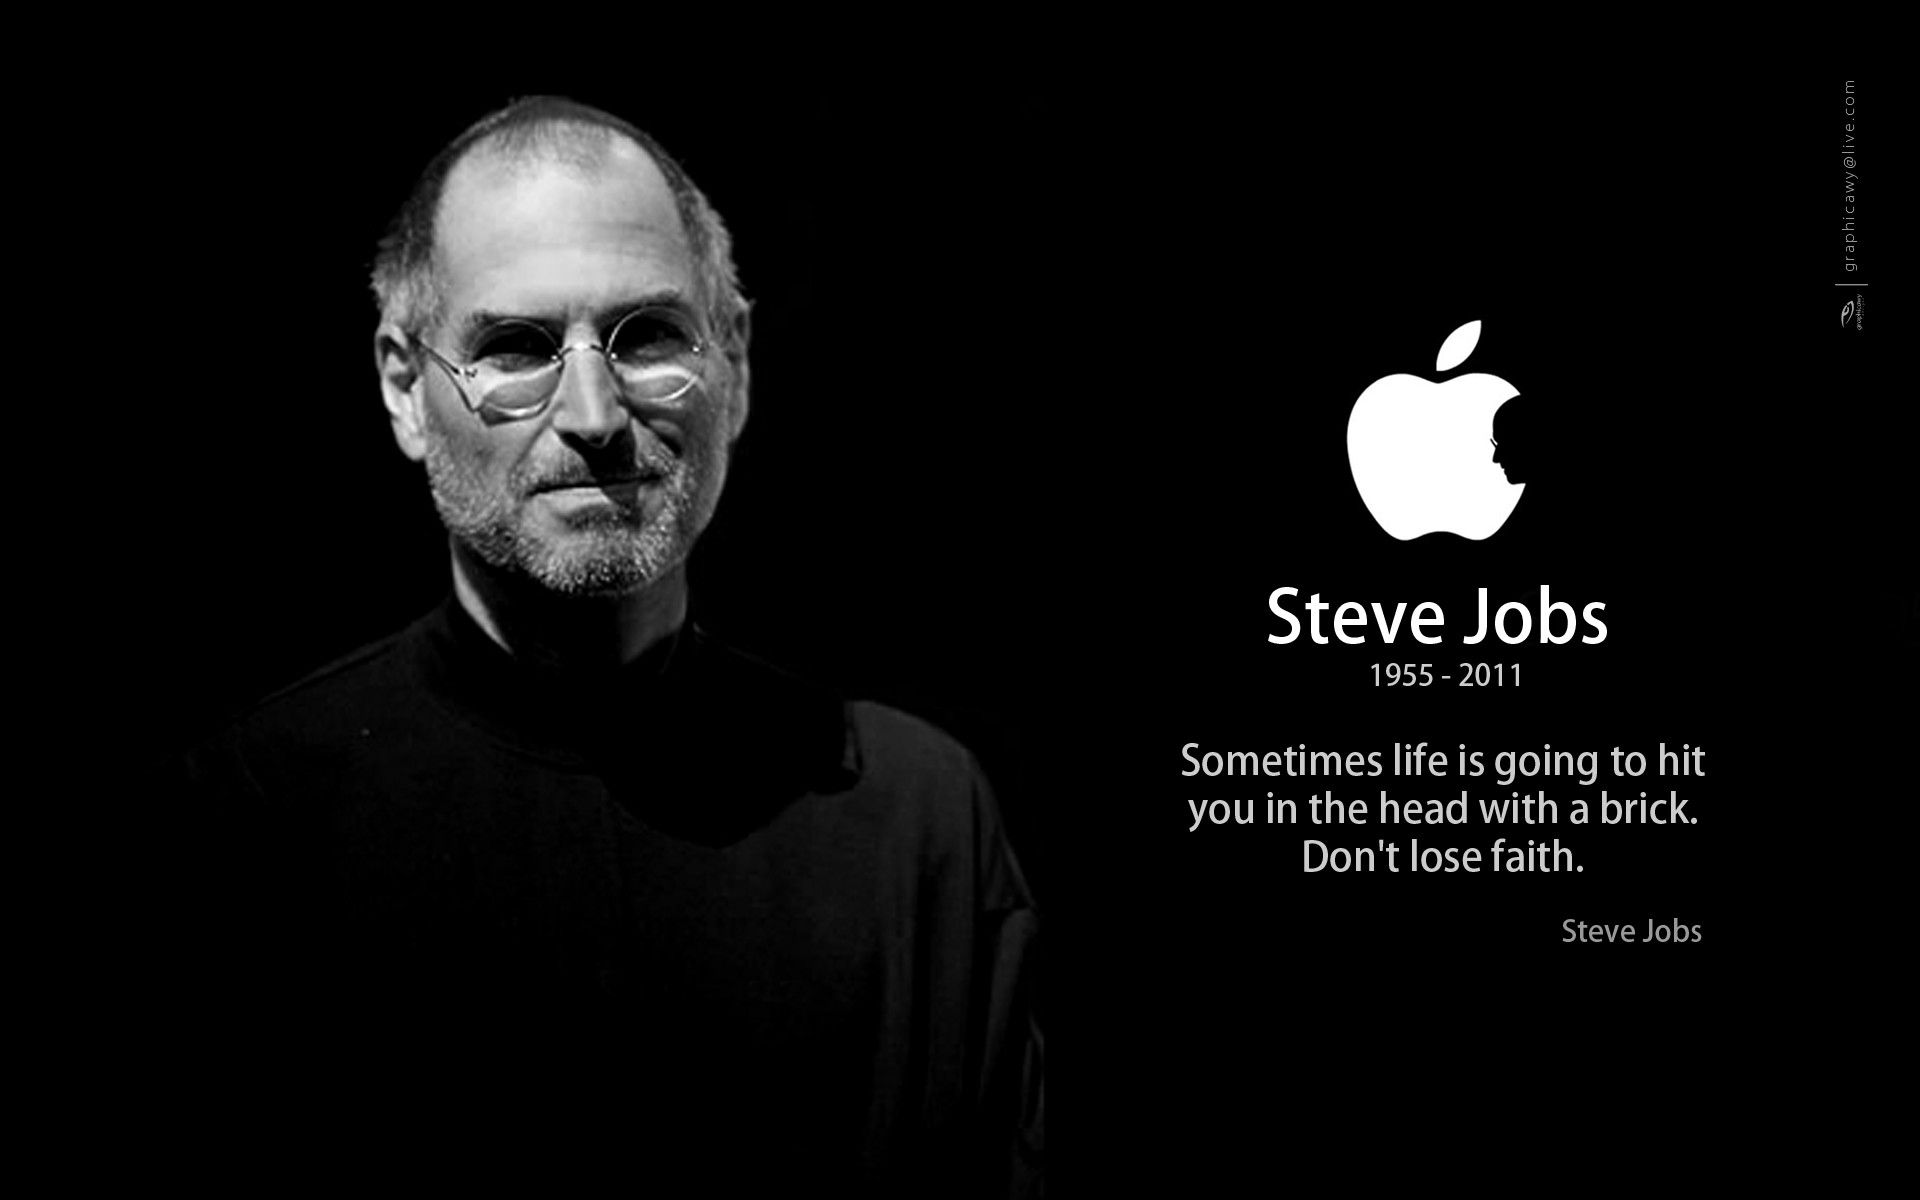 Steve Jobs Struggle Quotes , HD Wallpaper & Backgrounds